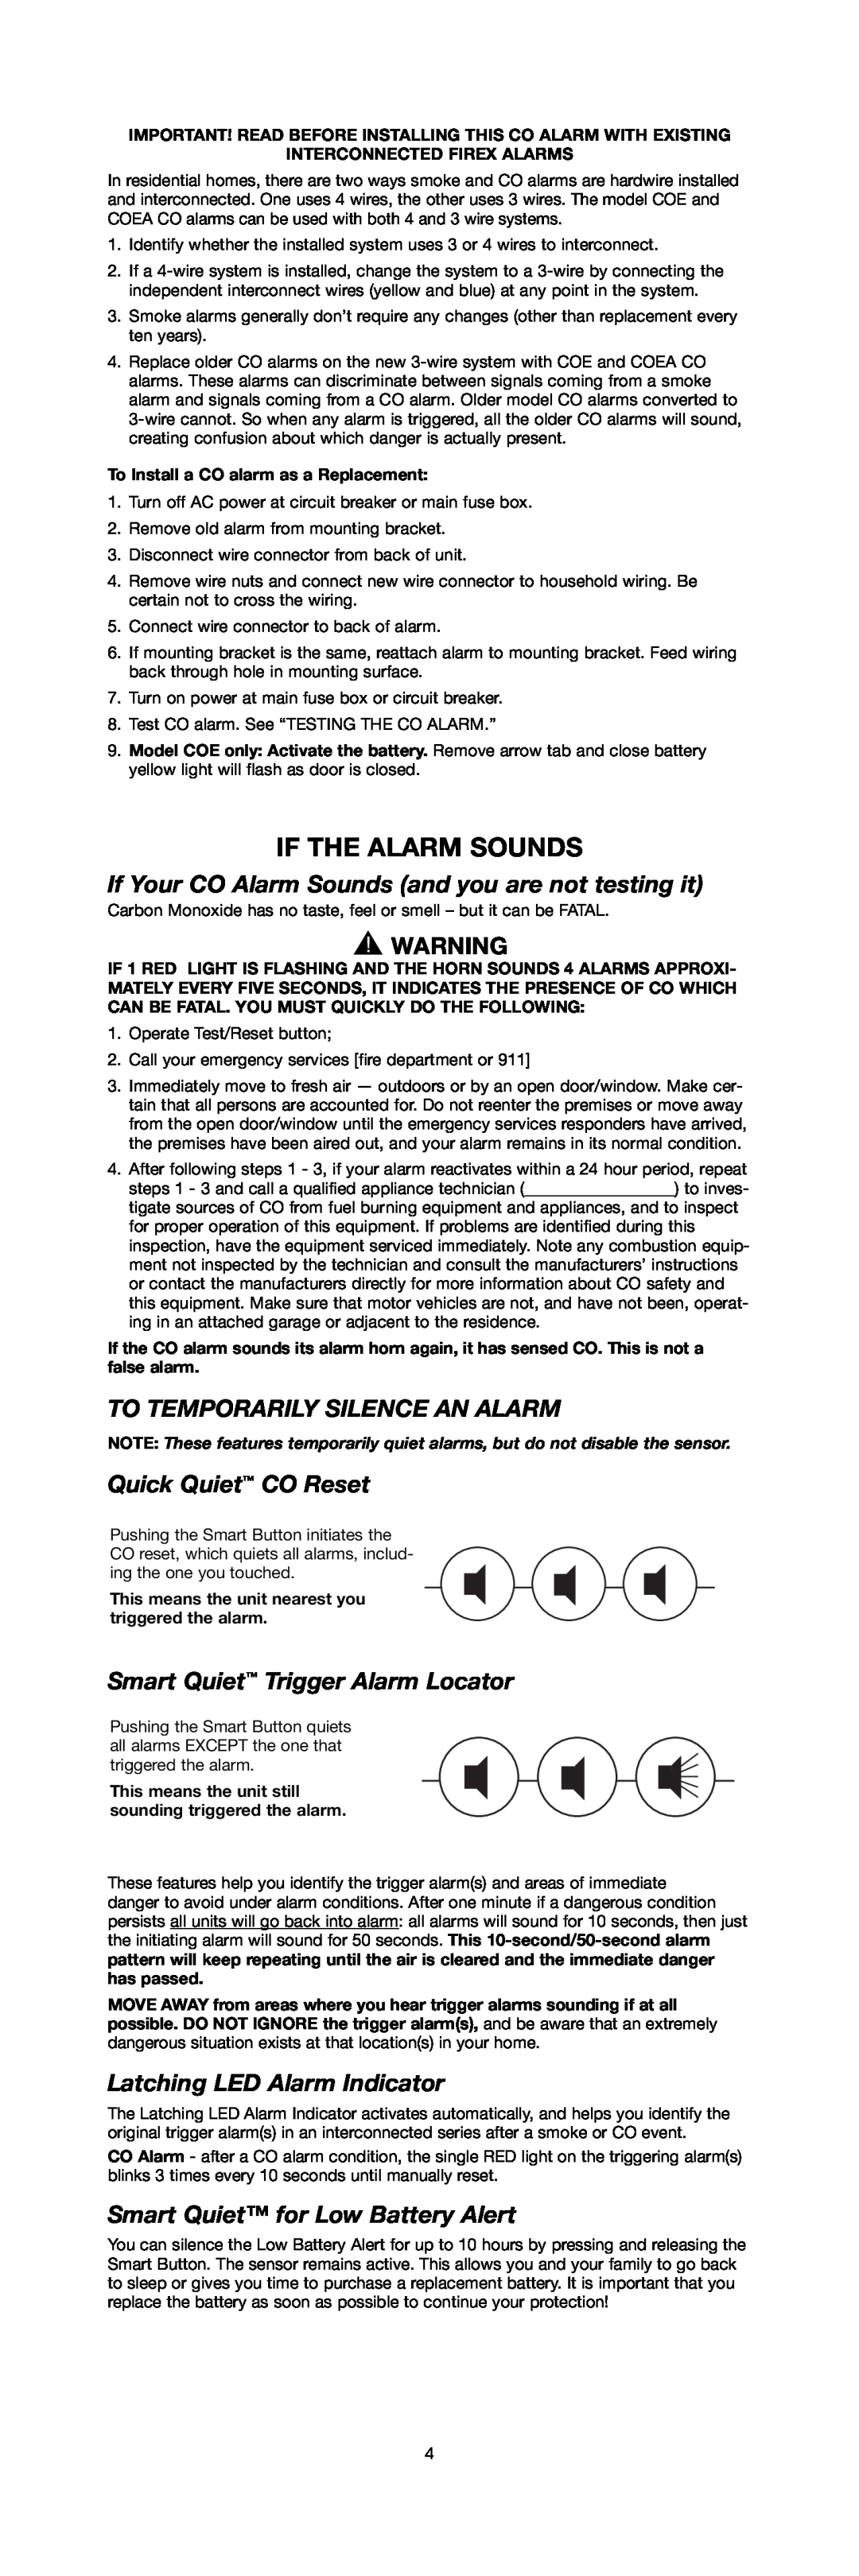 Firex SERIES 10000 specifications If The Alarm Sounds, To Temporarily Silence An Alarm, Quick Quiet CO Reset 